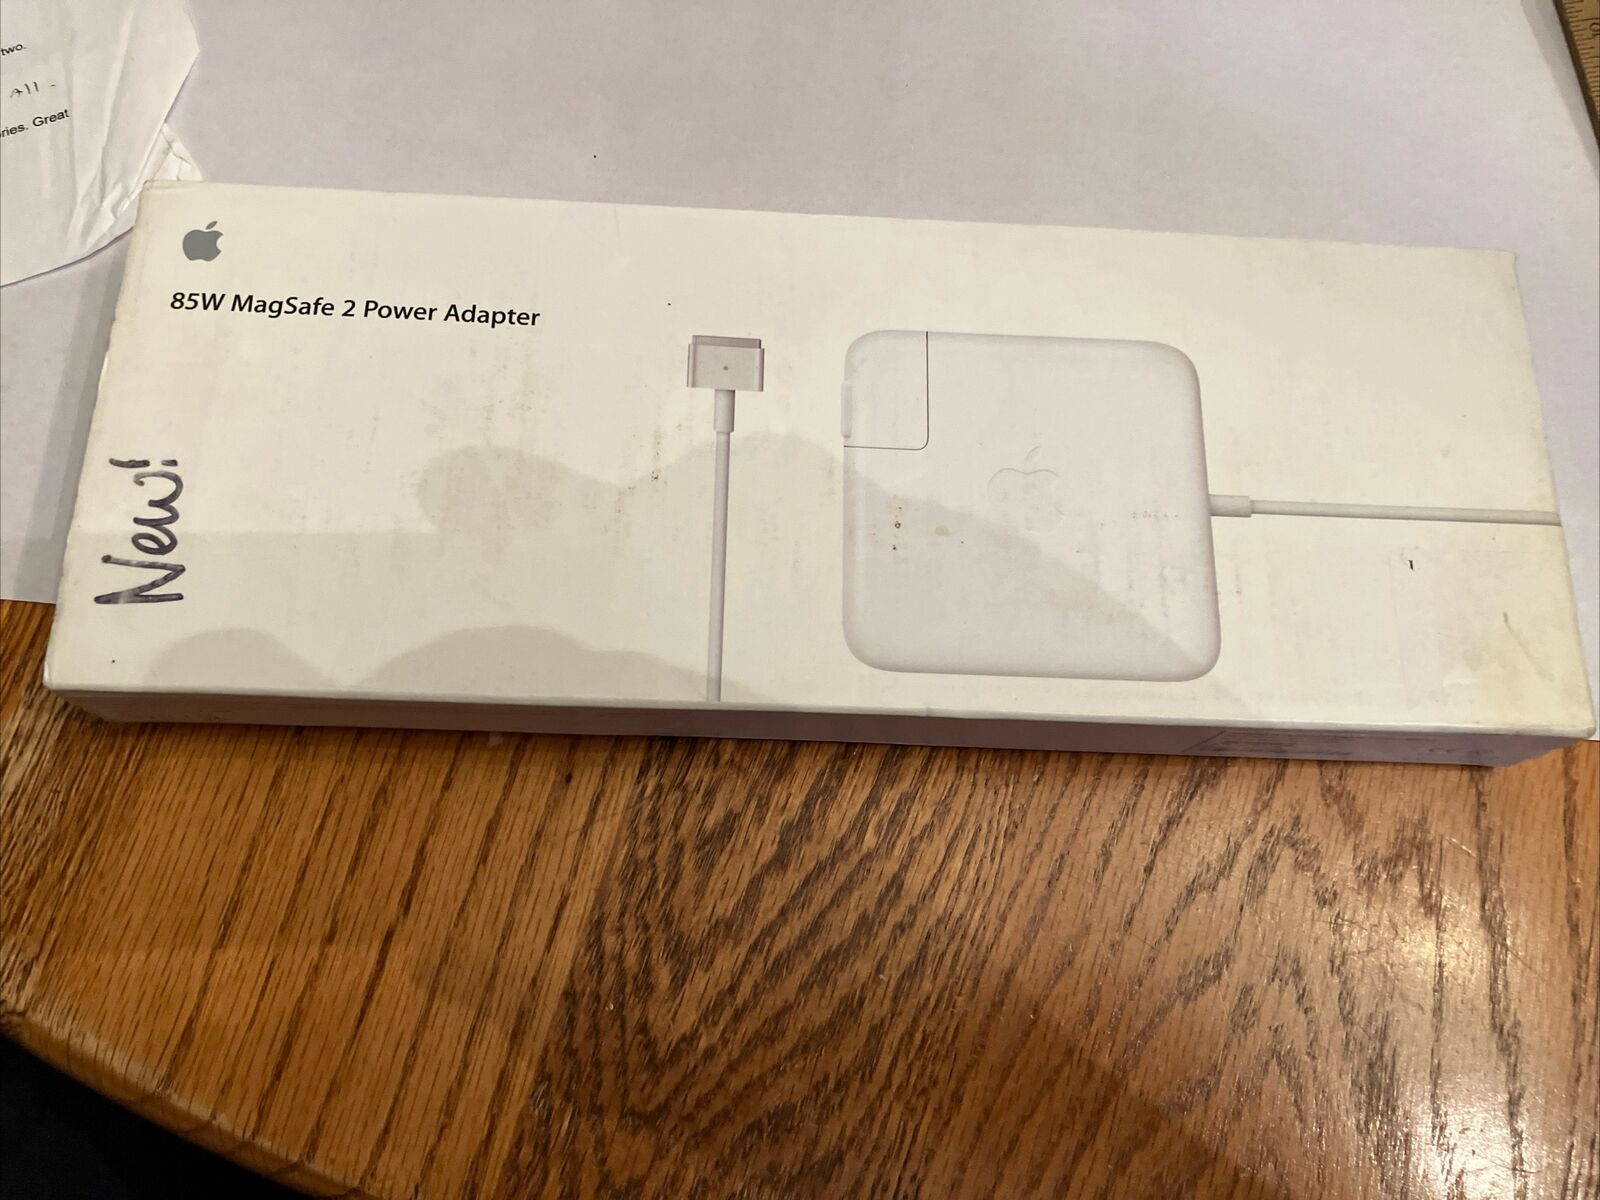 Genuine Apple 85W MagSafe 2 Power Adapter (MD506LL/A) - Model A1424